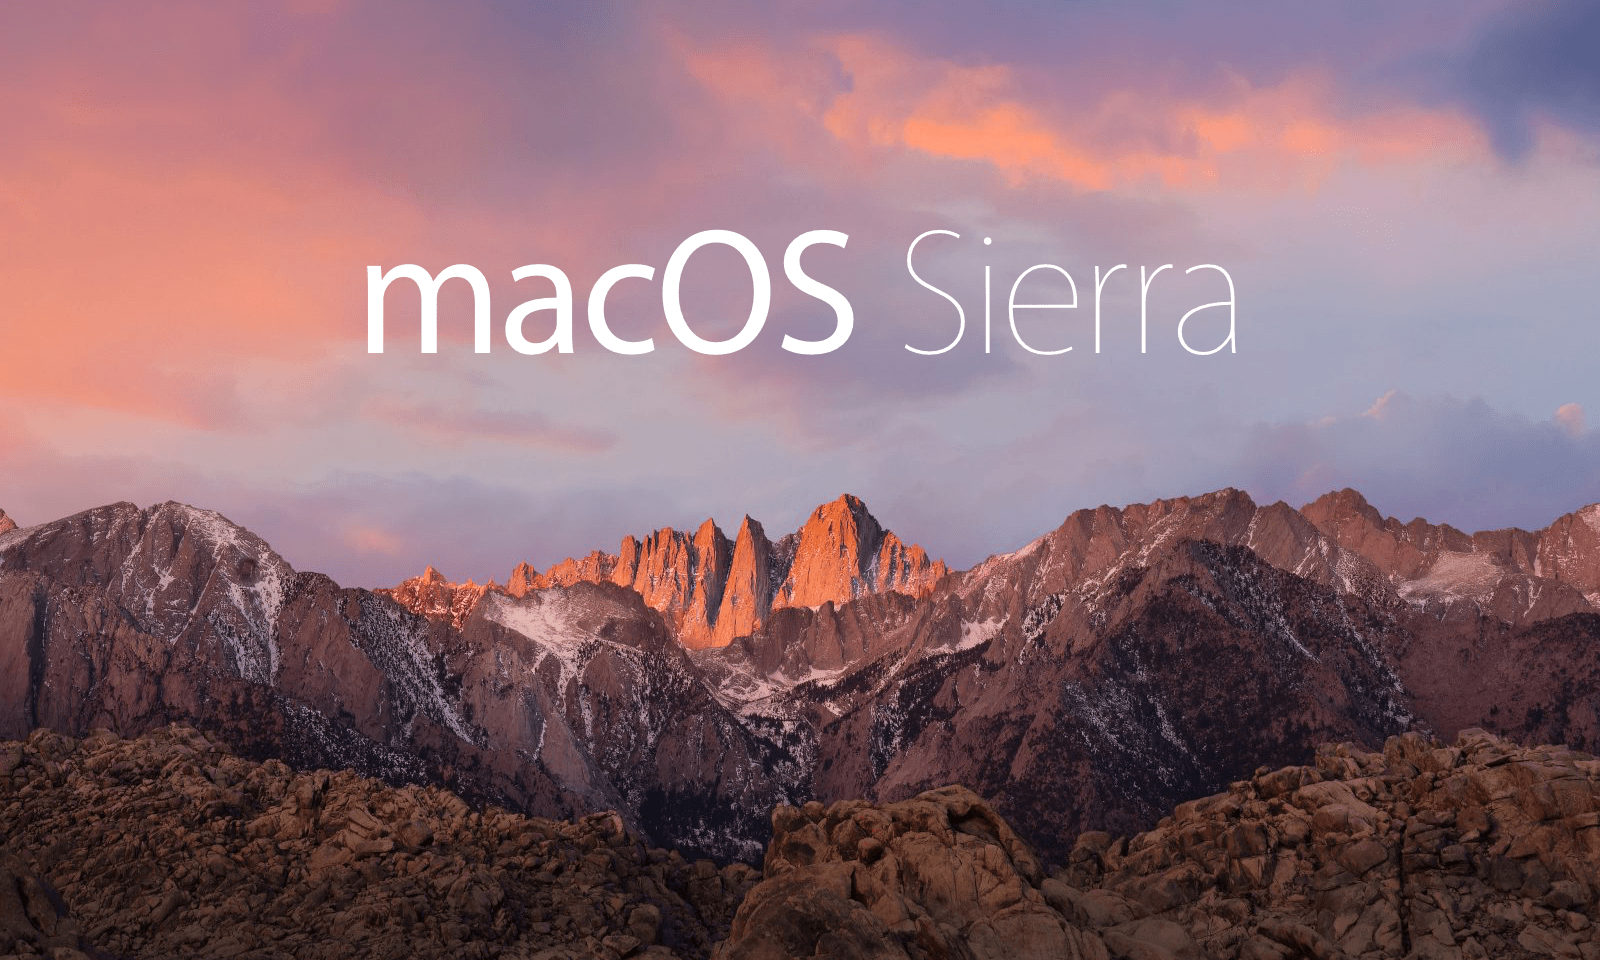 when will mac os sierra be available for macbook pro